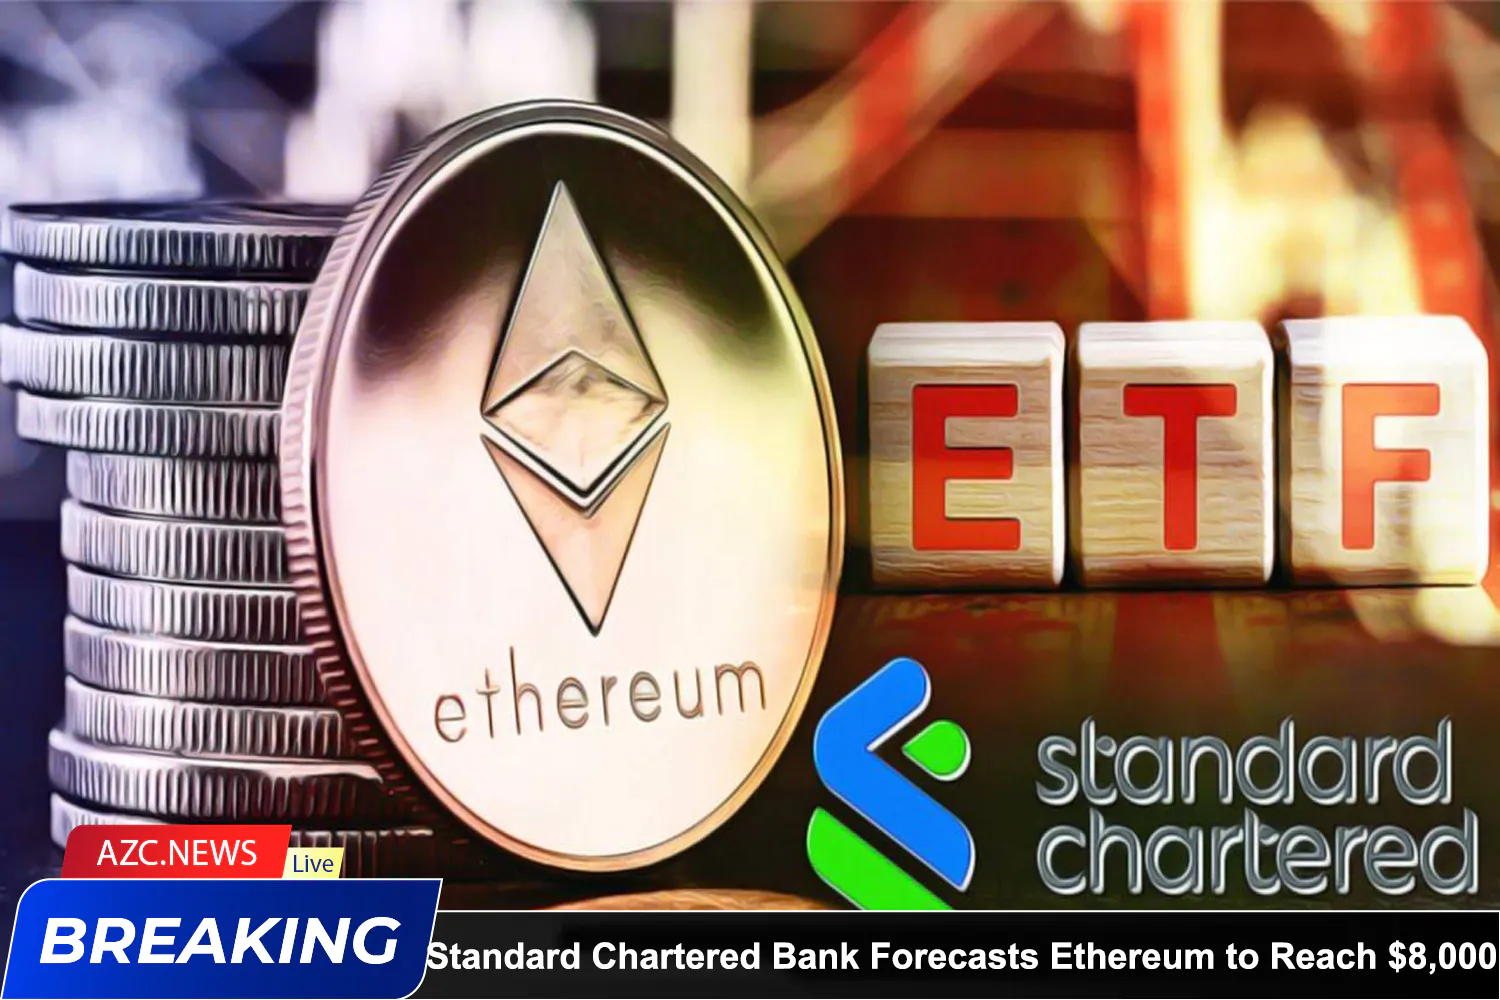 Azcnews Standard Chartered Bank Forecasts Ethereum To Reach $8,000